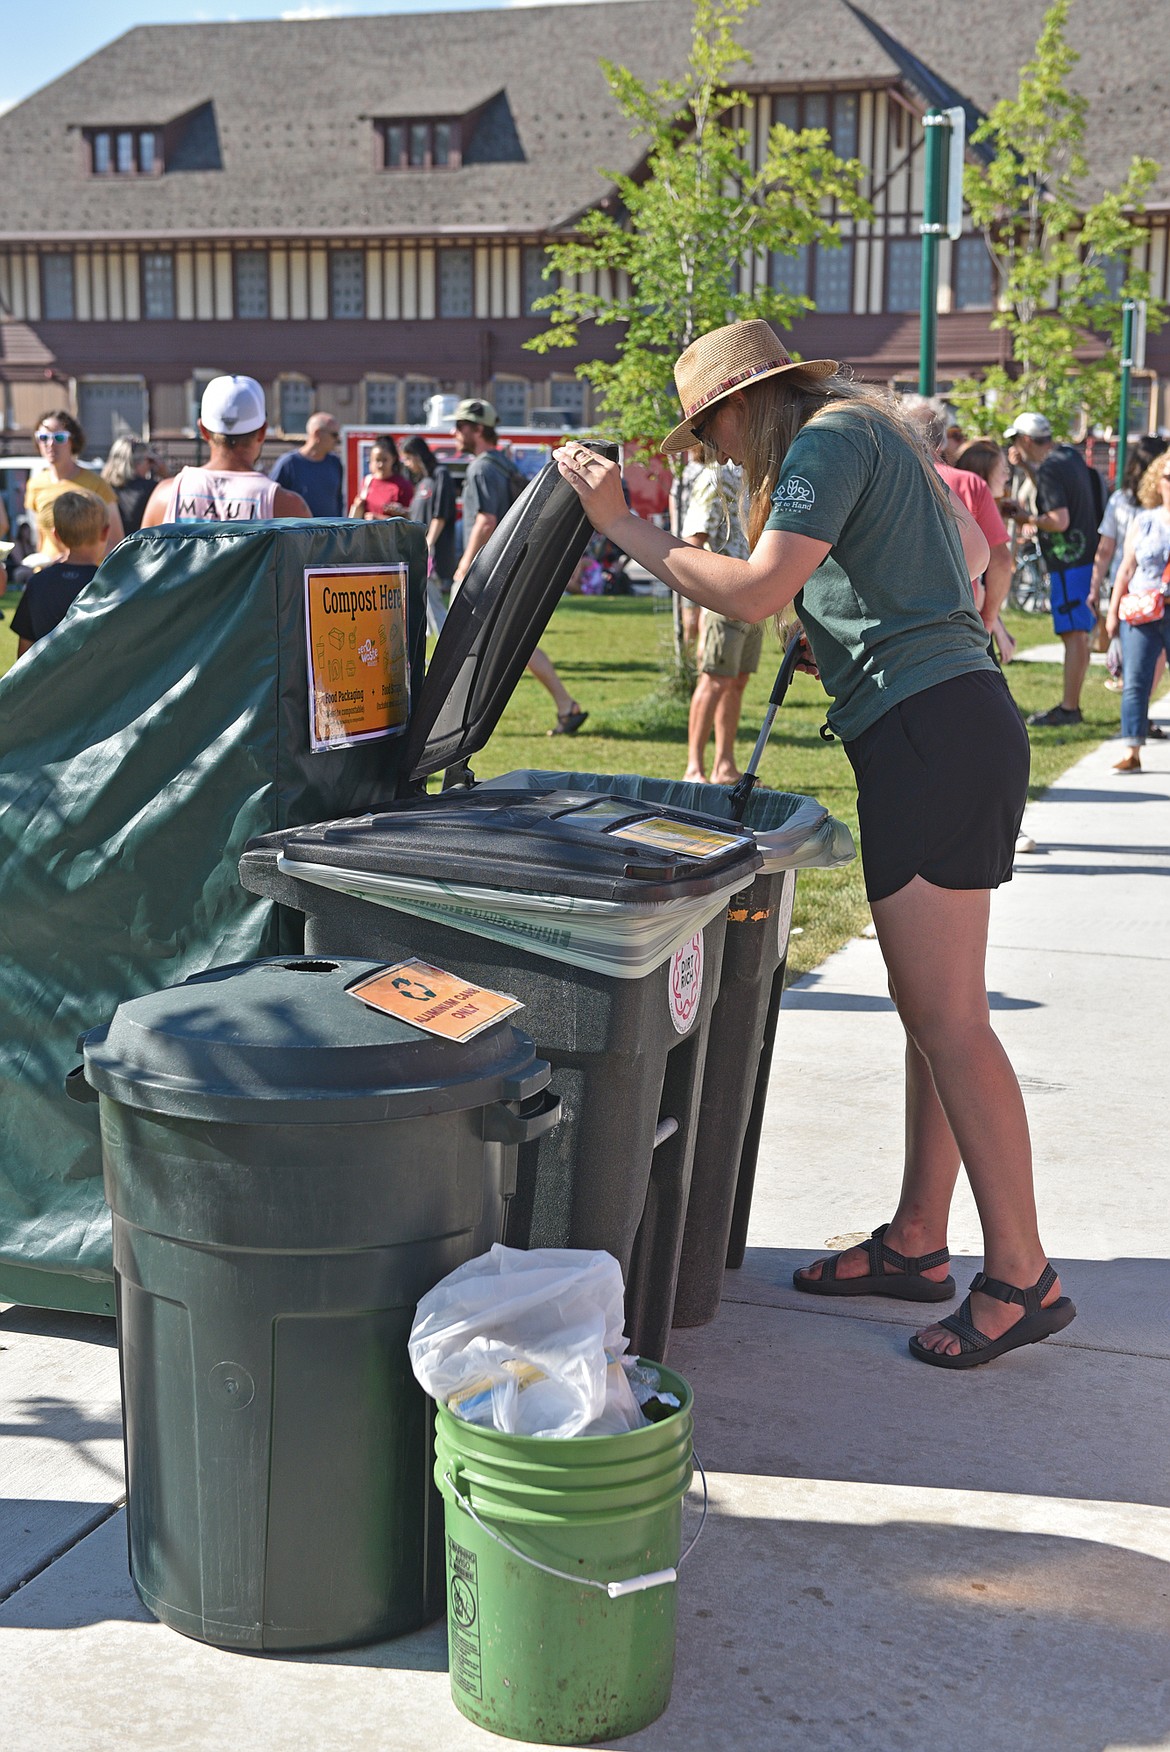 Andrea Getts with Land to Hand Montana frequently checks the bins for non-compostable materials during the Whitefish Farmers Market. (Julie Engler/Whitefish Pilot)